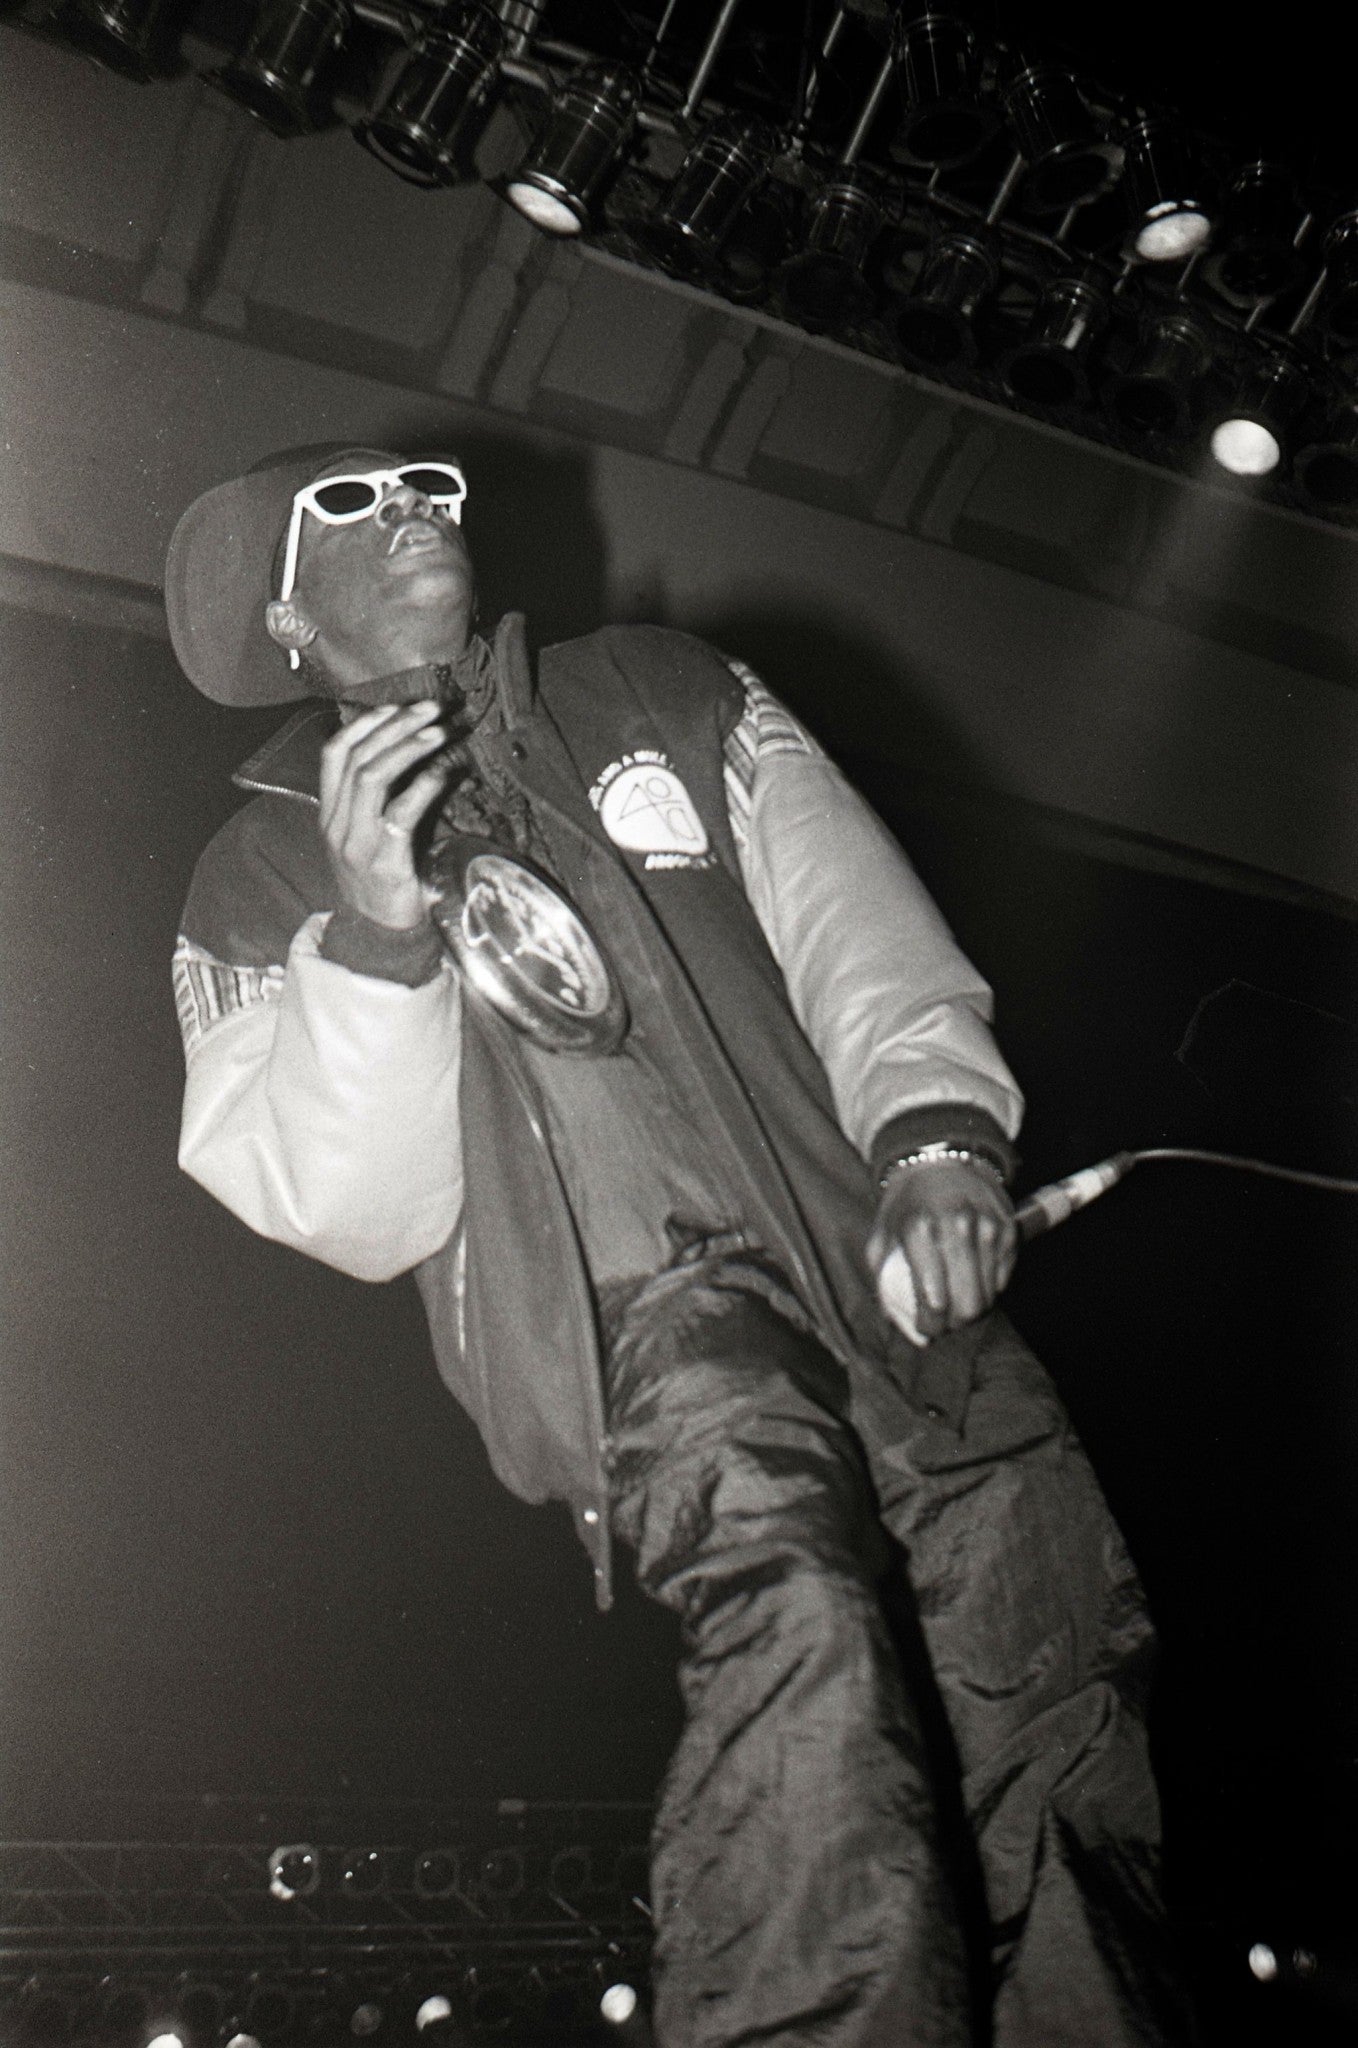 Public Enemy - Holding the Microphone on Stage, England, 1990 Poster